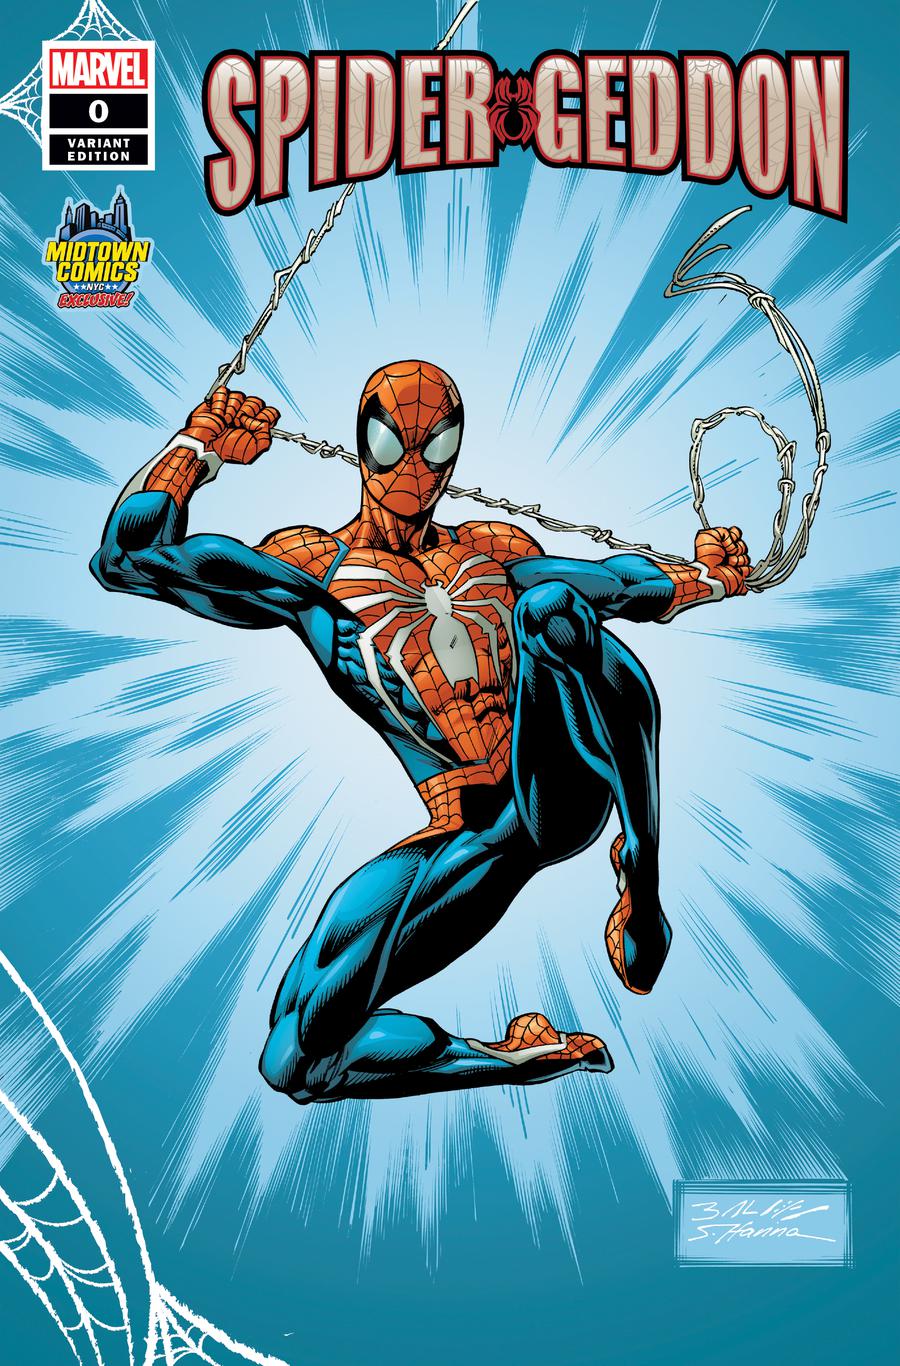 Spider-Geddon #0  Midtown Exclusive Cover A Mark Bagley PS4 Costume Variant Cover